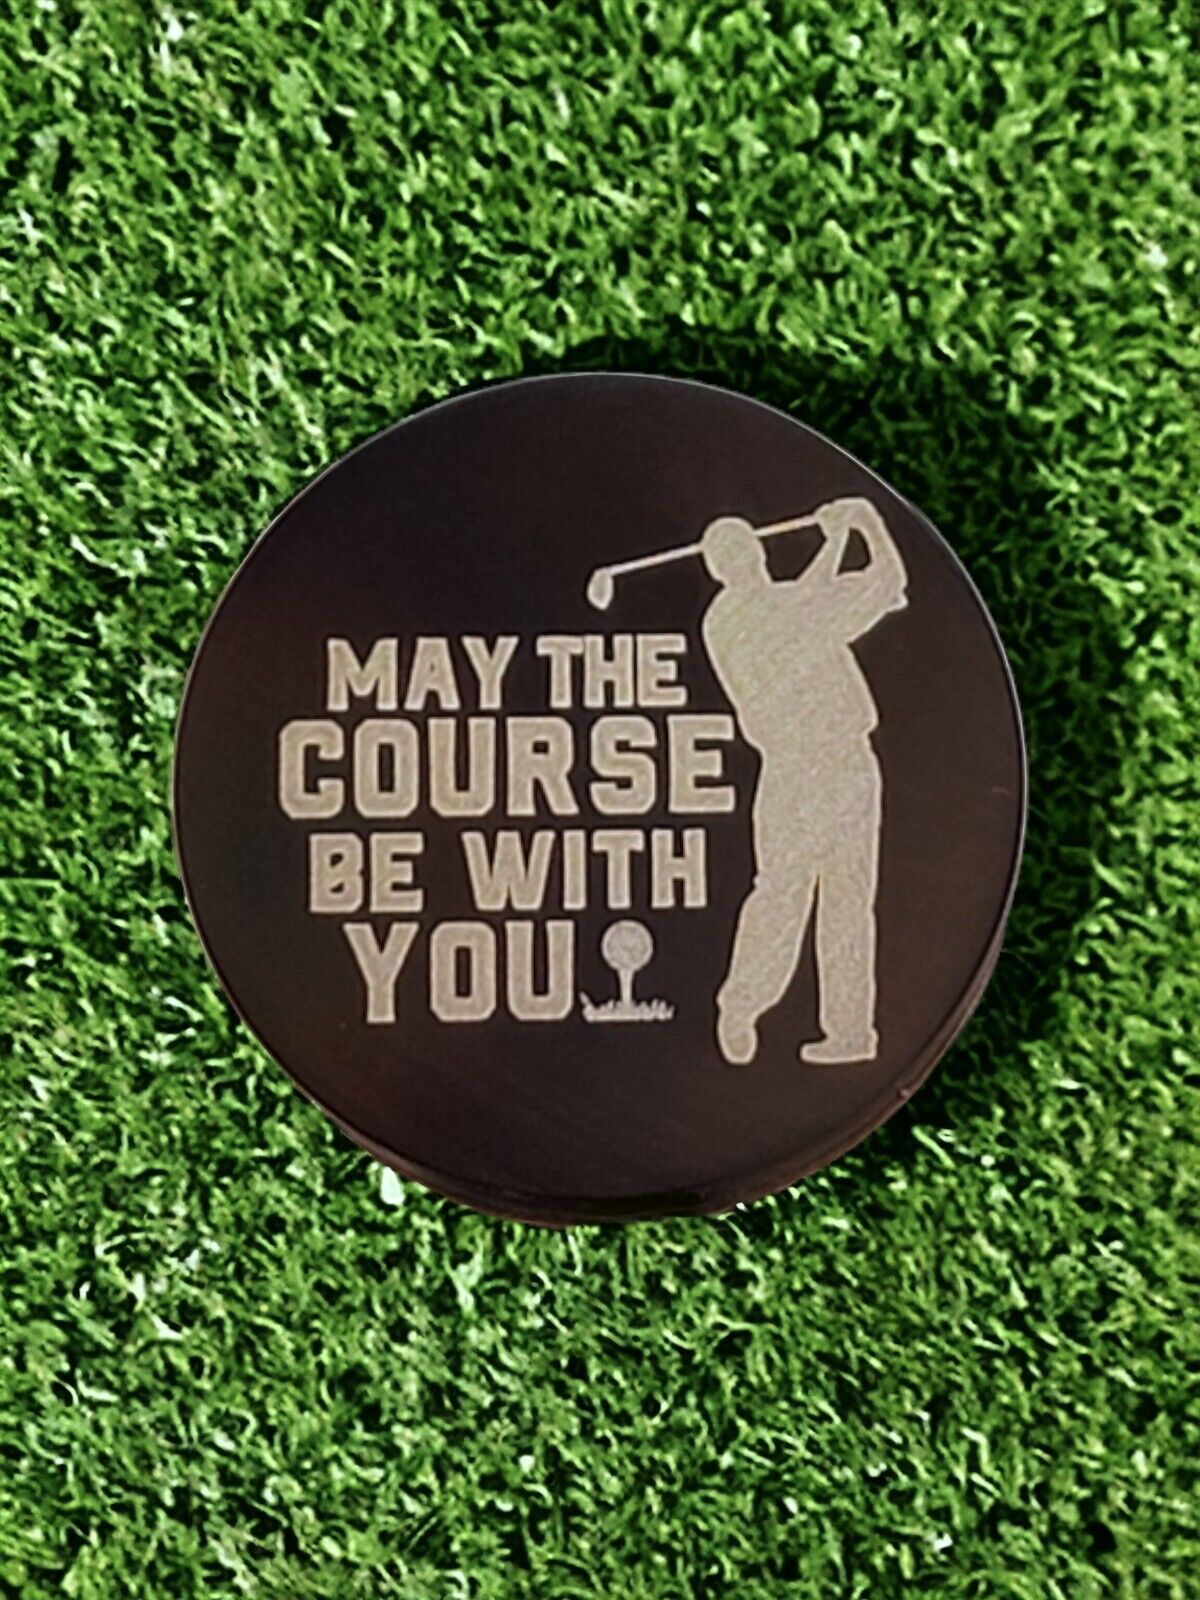 "May the Course Be With You" Laser Engraved Stainless Steel Novelty Golf Ball Marker